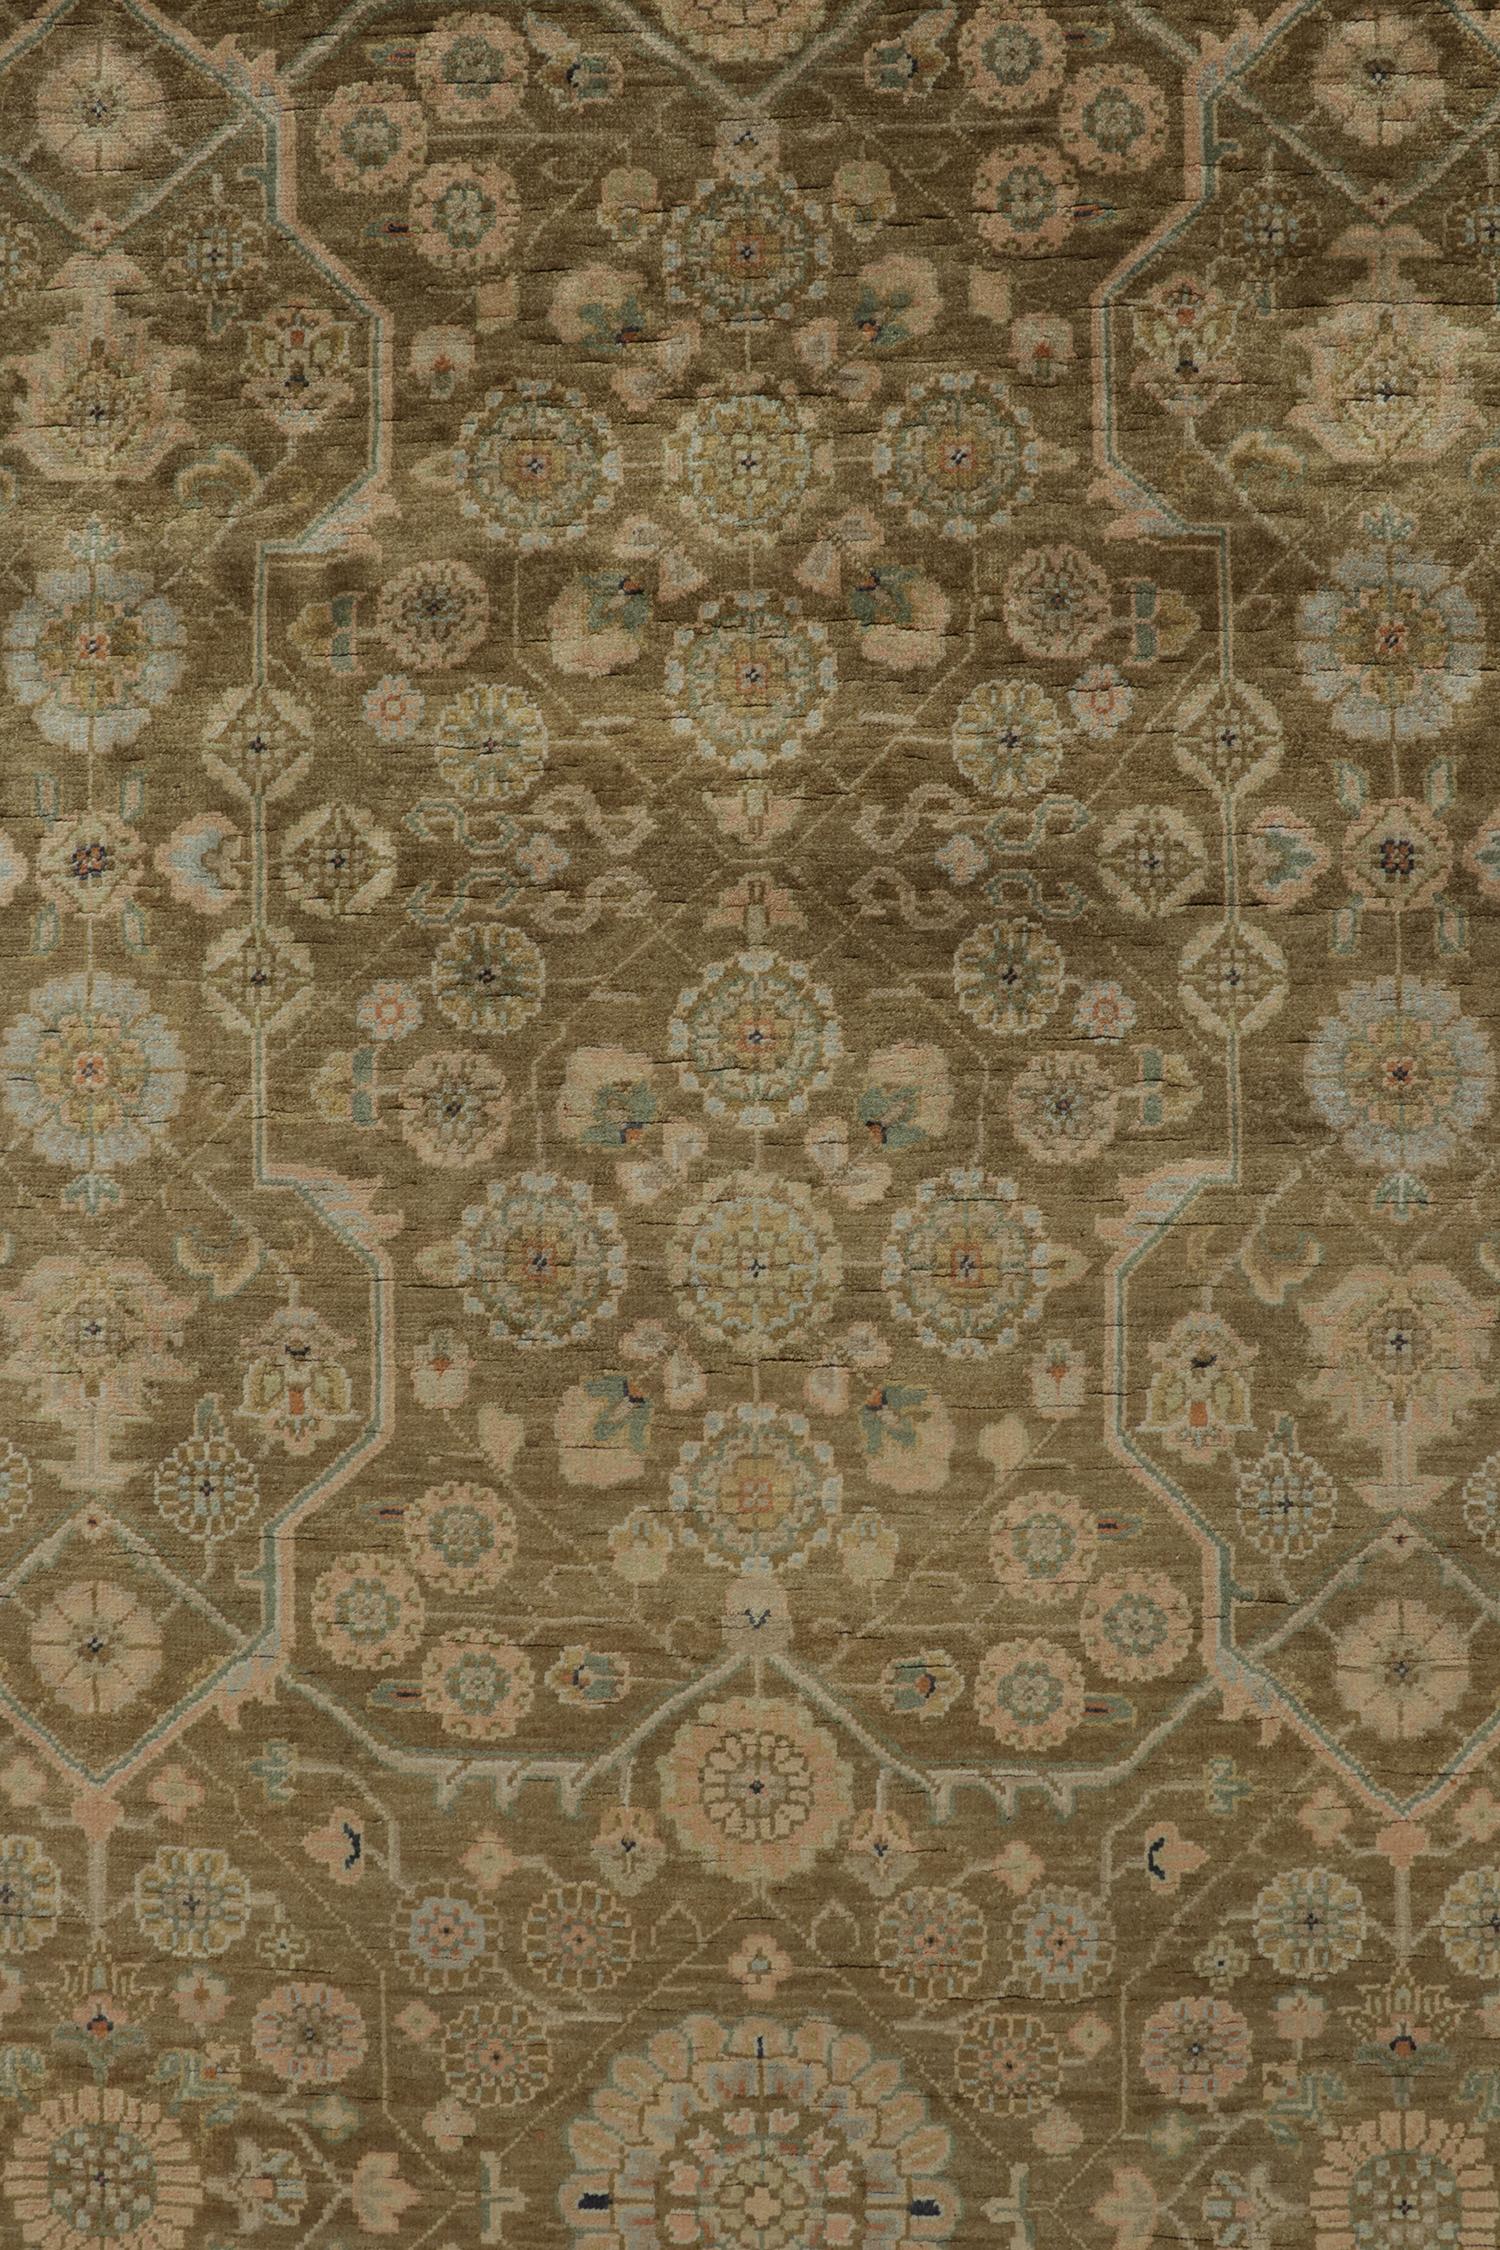 Contemporary Rug & Kilim’s Classic Tabriz Style Rug in Green, Beige and Brown Floral Patterns For Sale